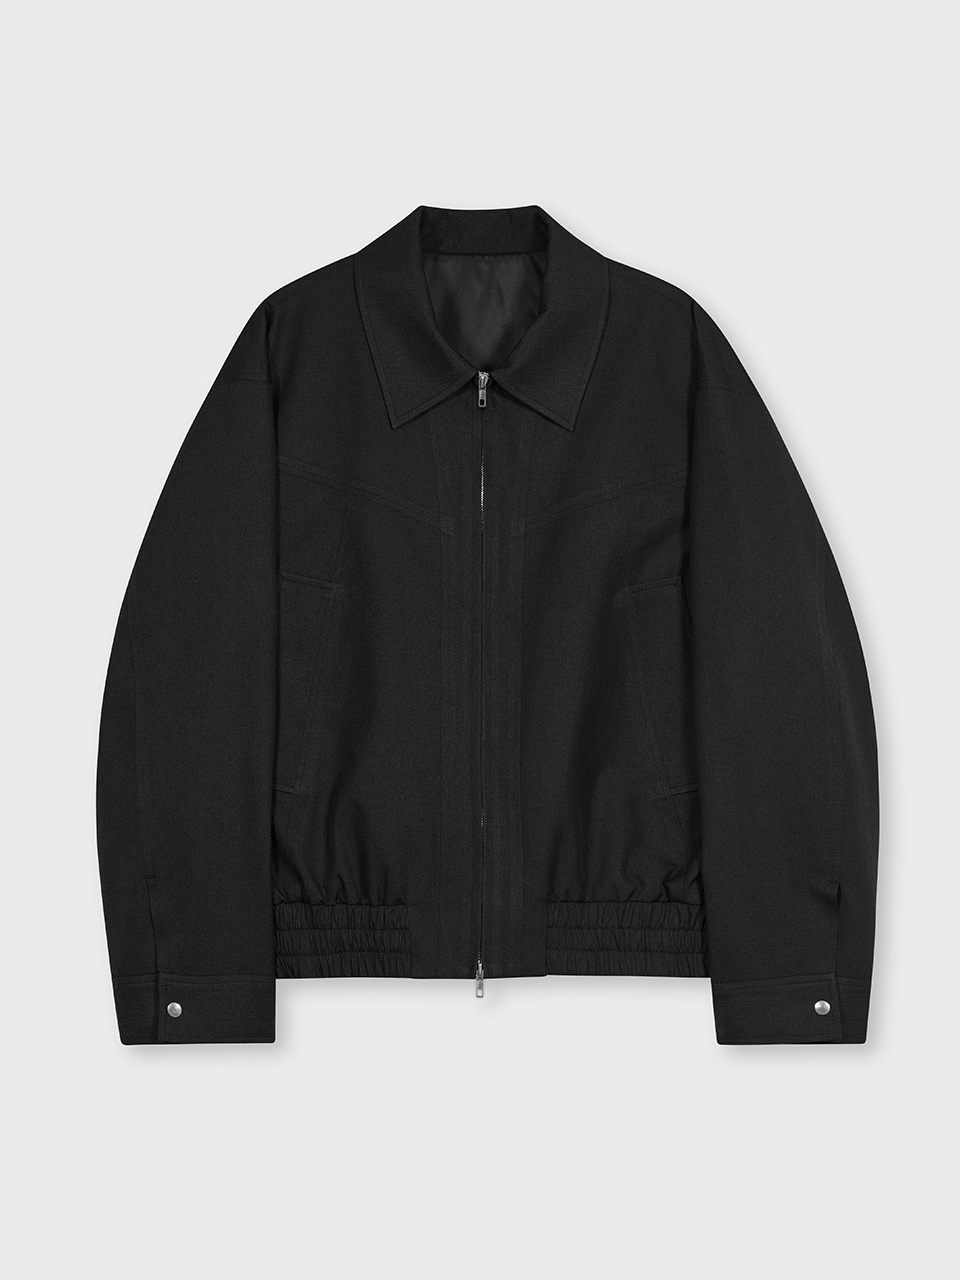 OURSCOPE - TELLY LINE BLOUSON (EXTRA BLACK)